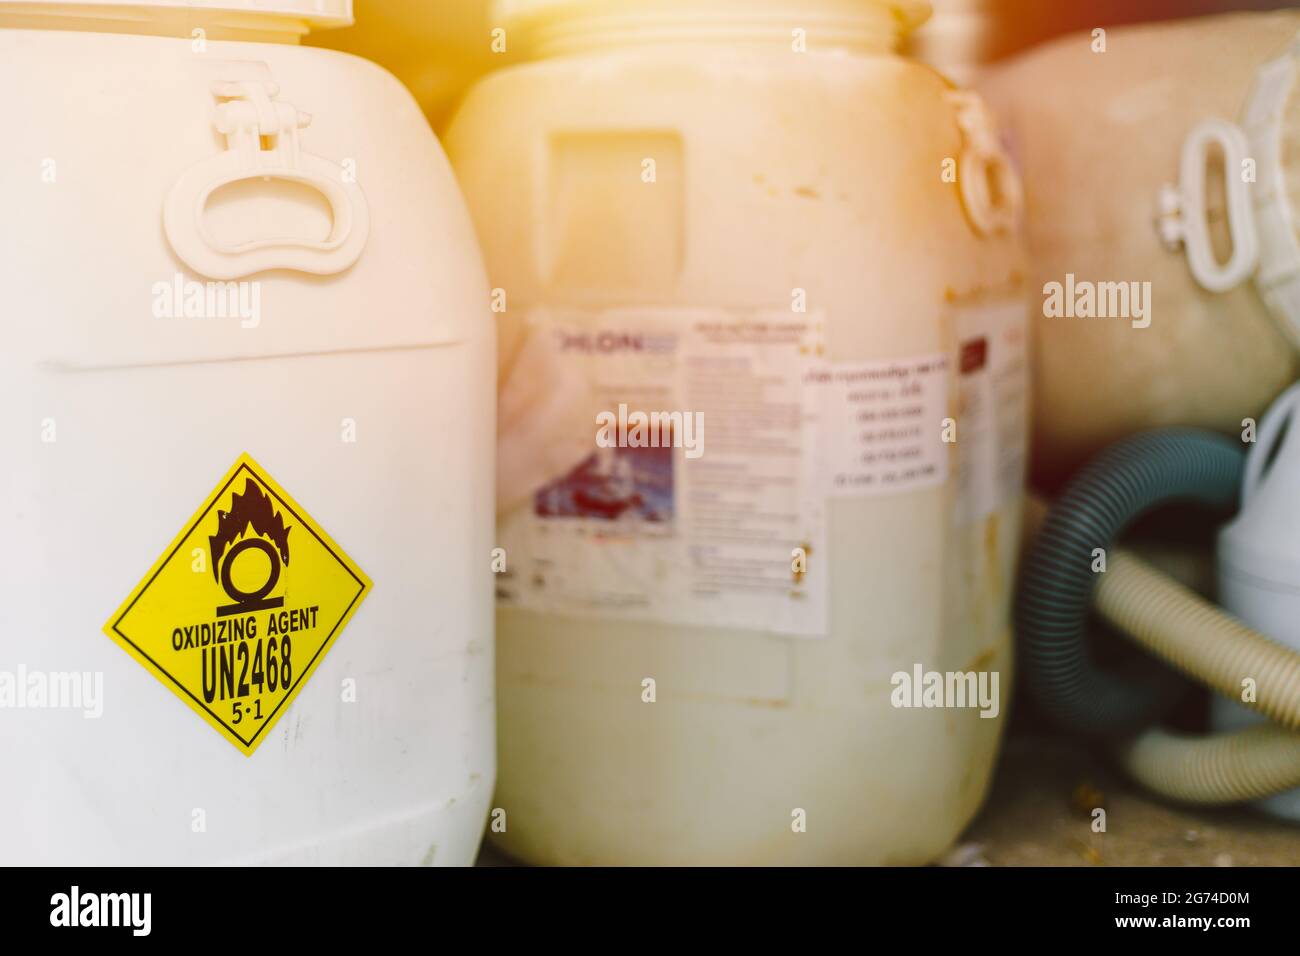 Dangerous chemical Oxidizing agent UN2468 Trichloroisocyanuric acid or Chlorine tank for pool disinfectant. Stock Photo